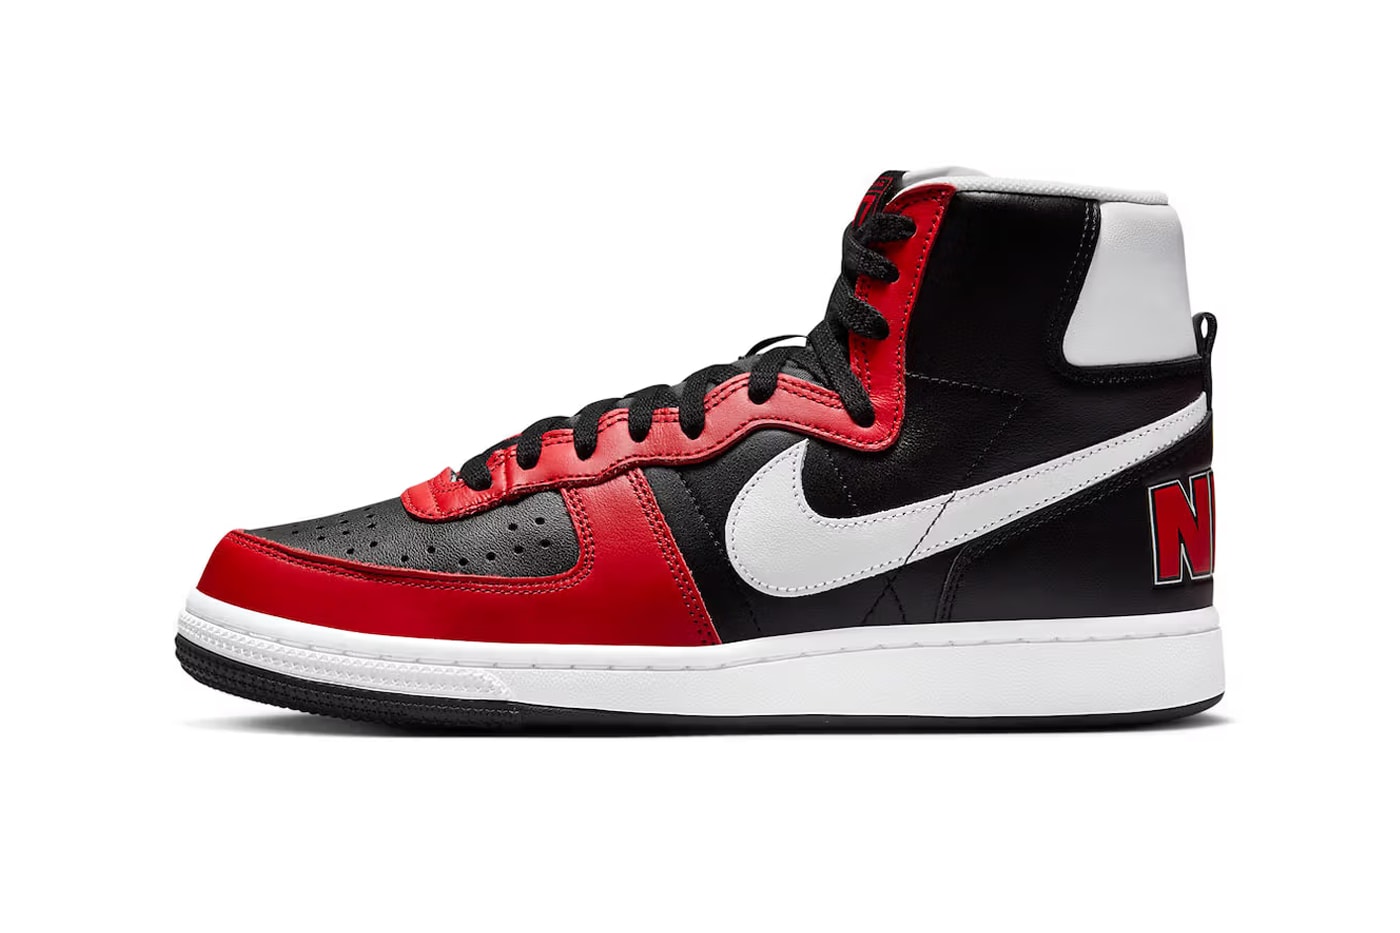 Nike Pays Homage to Portland Trail Blazers With New Terminator High Footwear